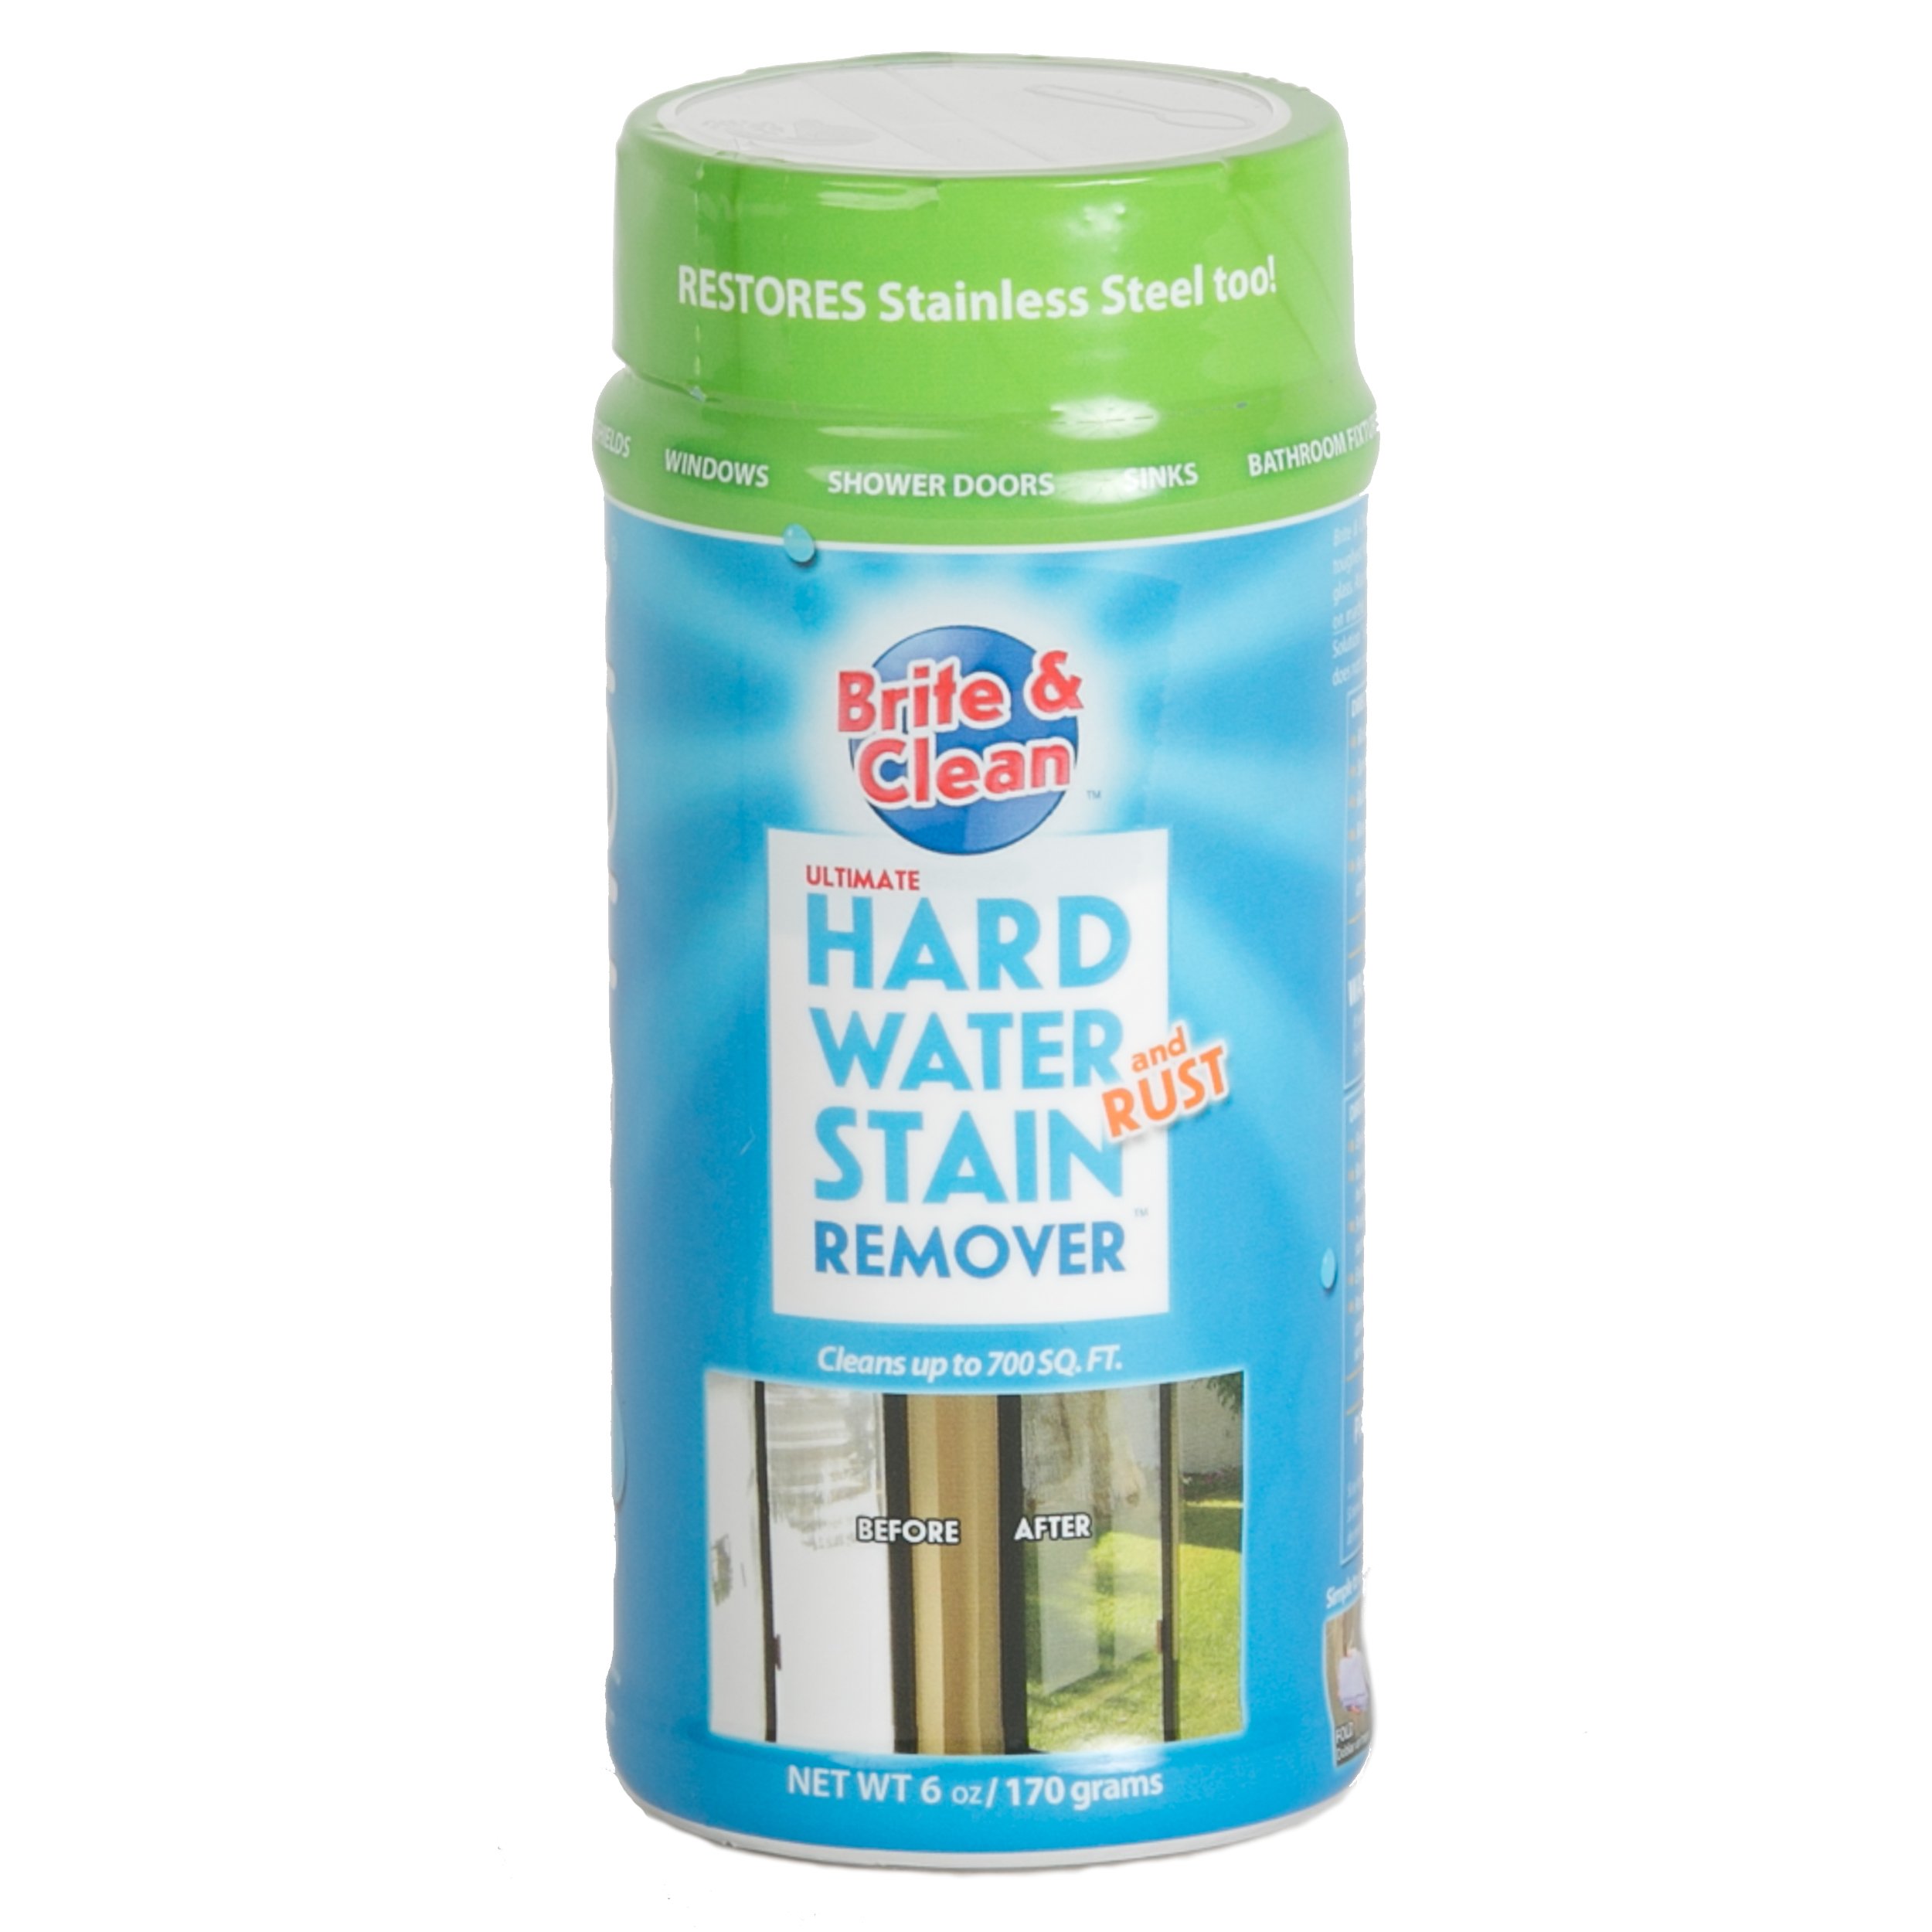 Brite & Clean Ultimate Hard Water Stain Remover, 6 Ounce (Pack of 1)  (A-SCS-1)